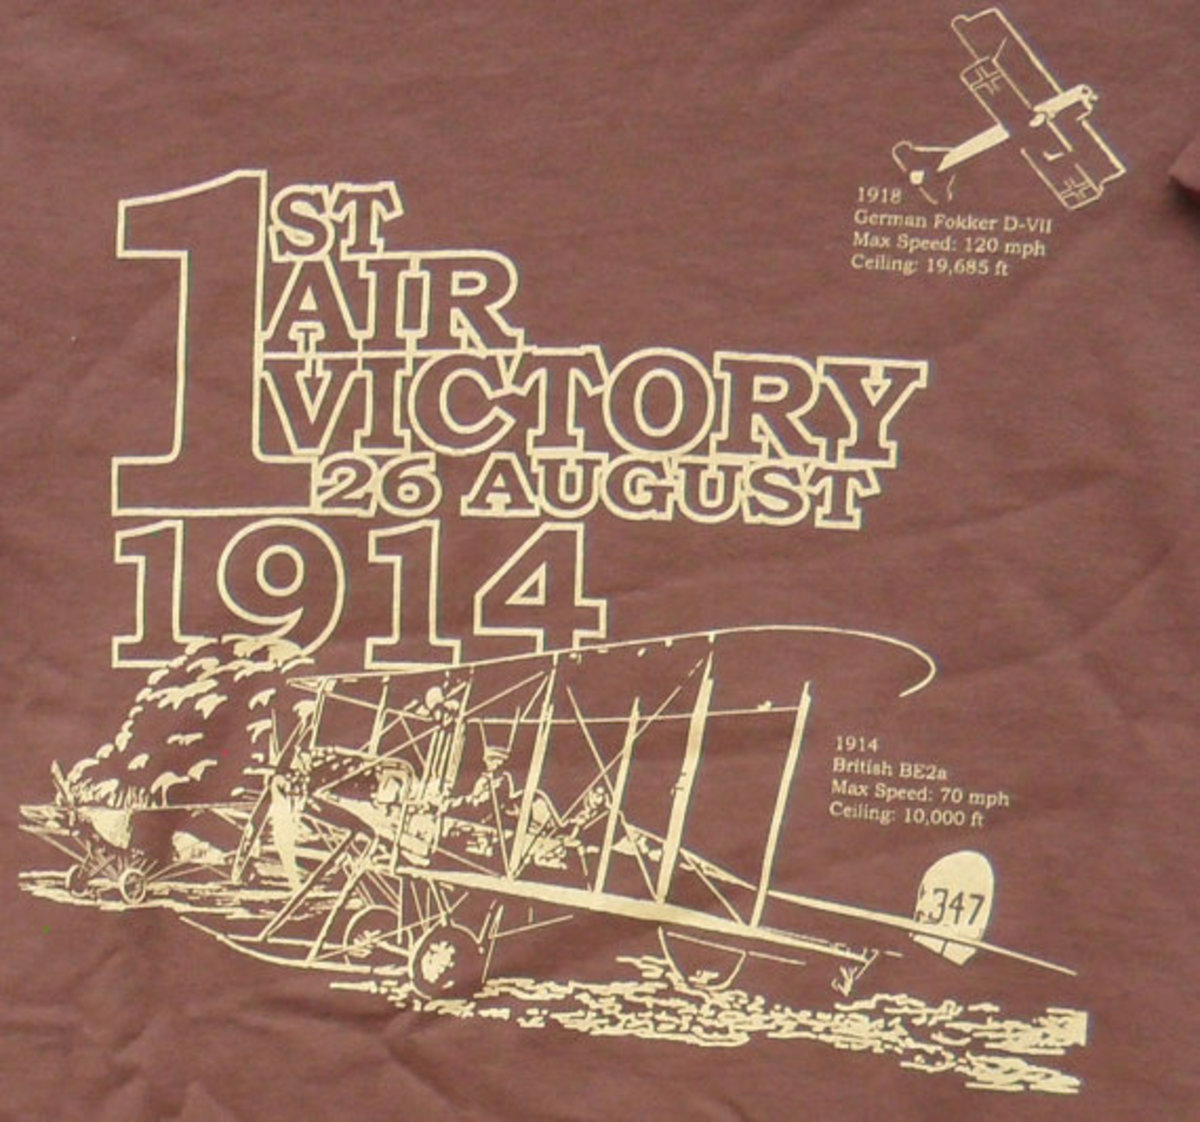 This t-shirt shows the story of the first air victory, and why it happened on the ground.